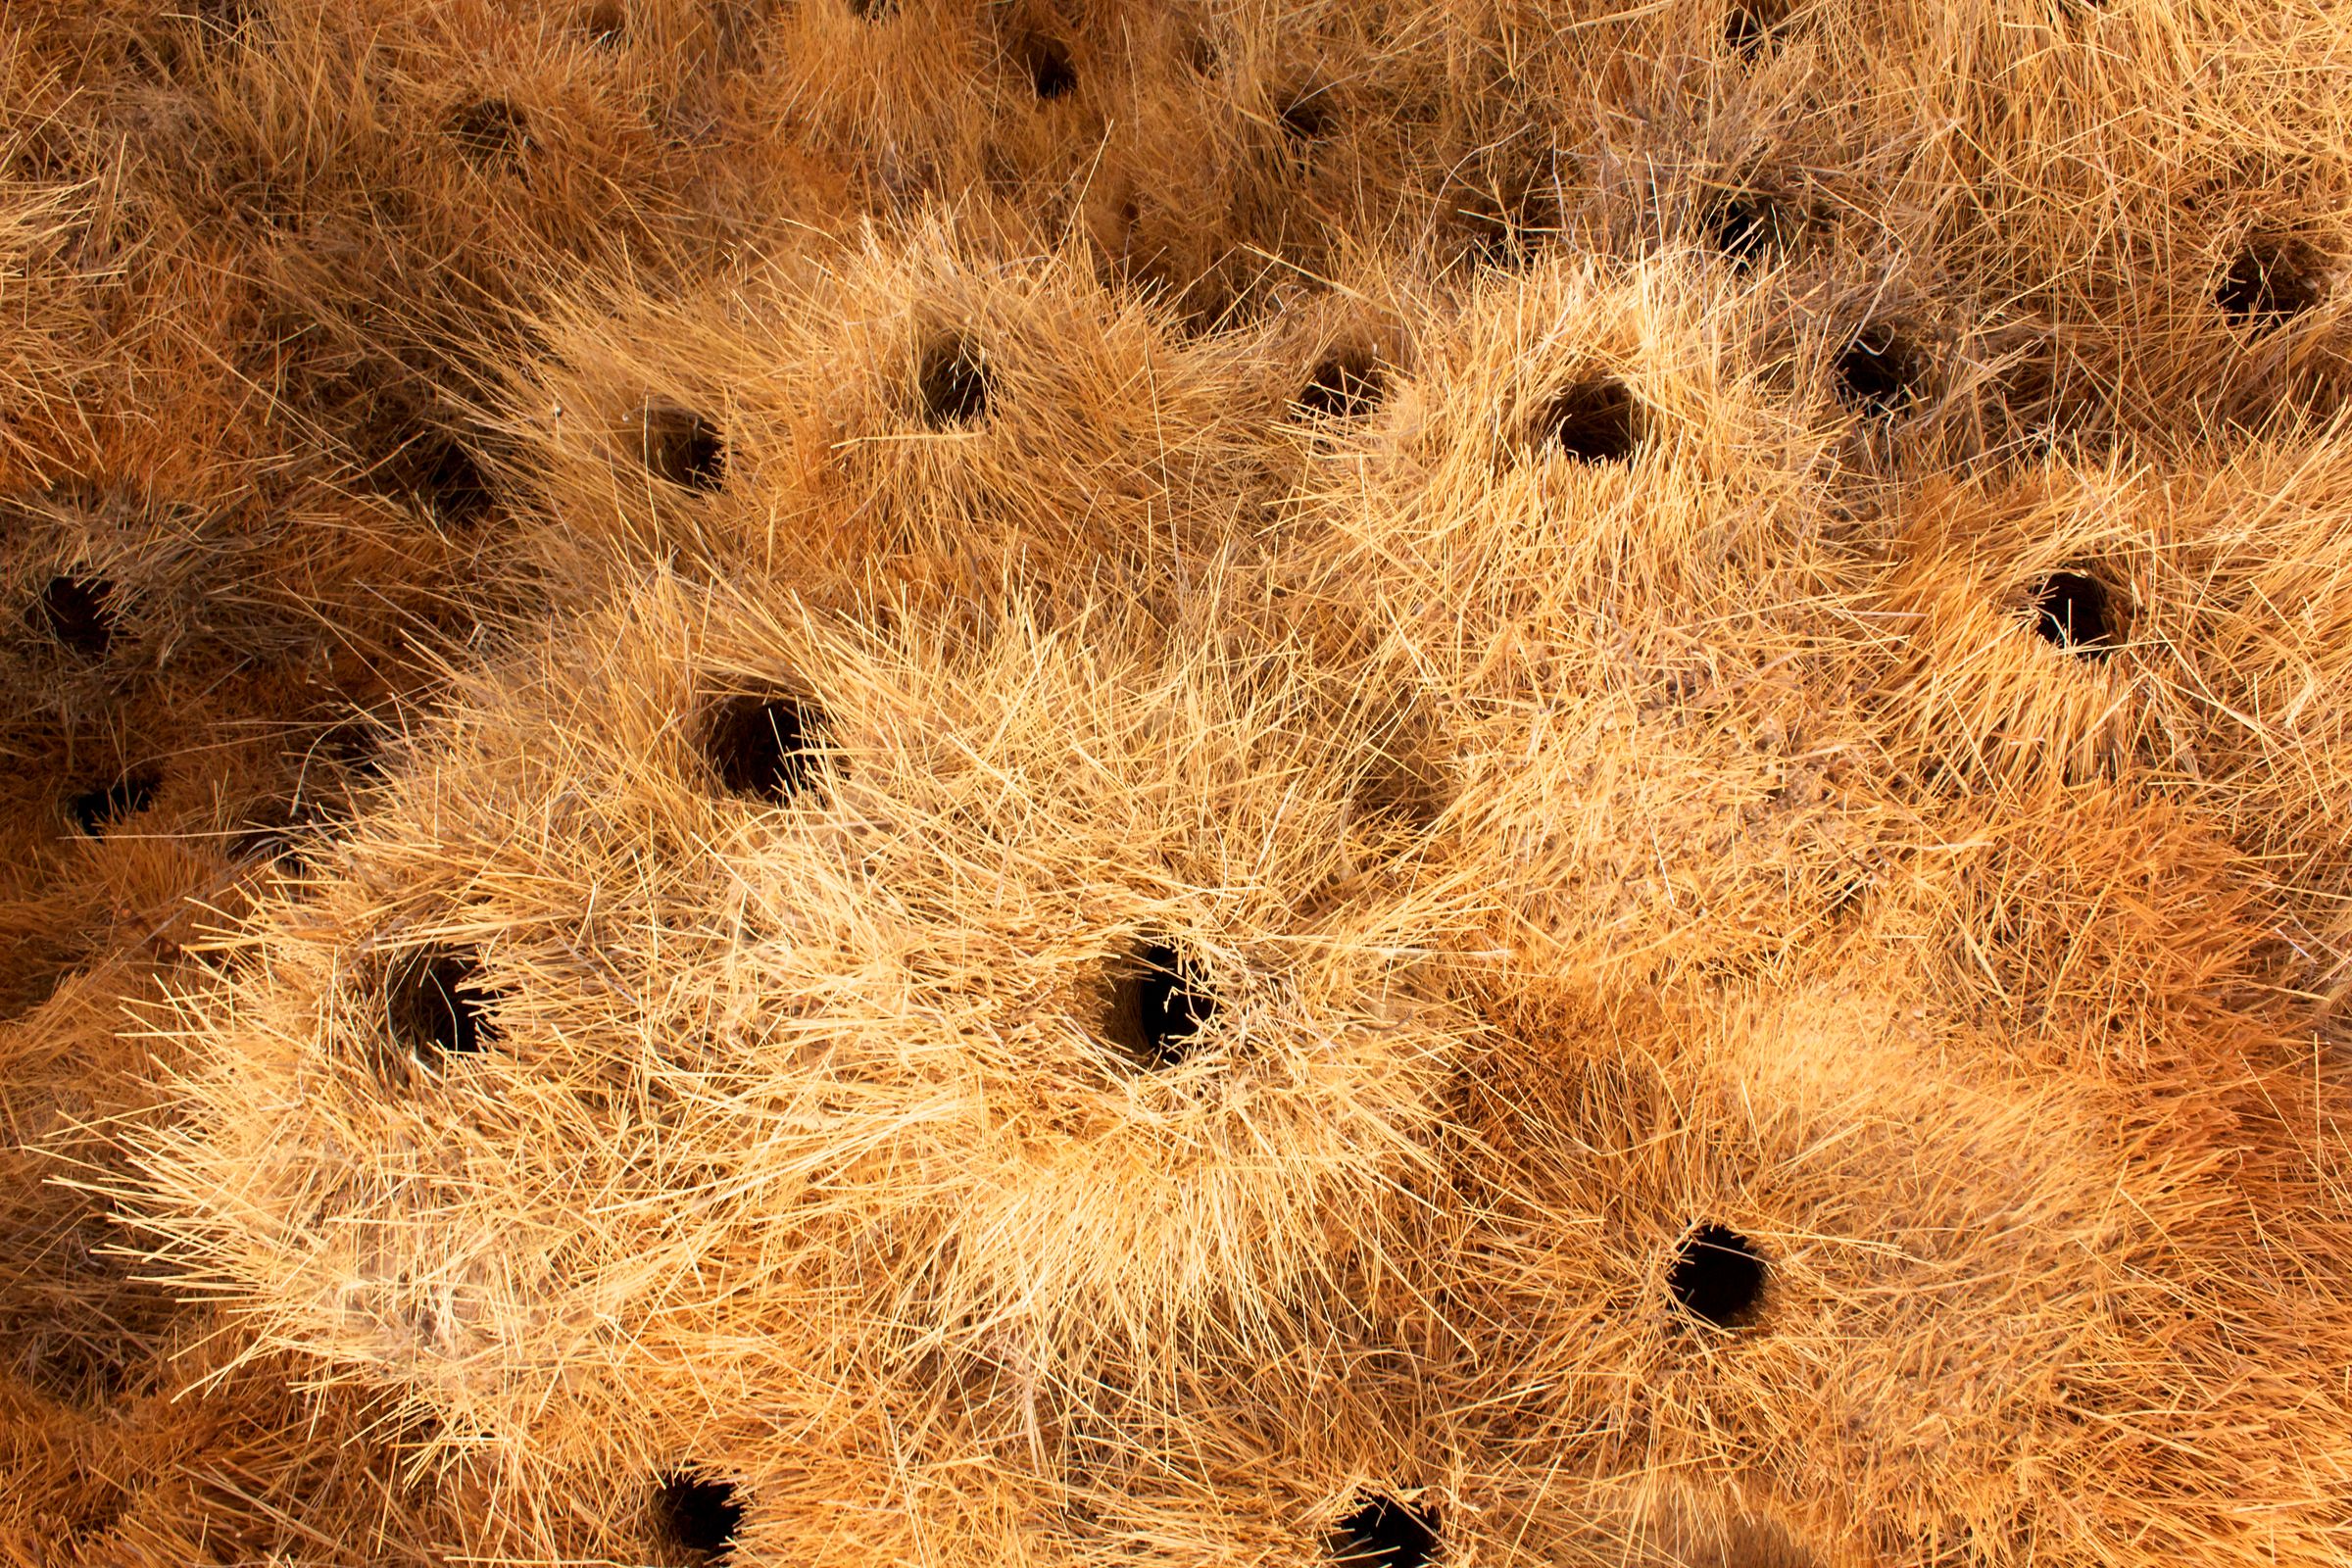 A cluster of Sociable Weaver nests during our Namibia wildlife photography tour